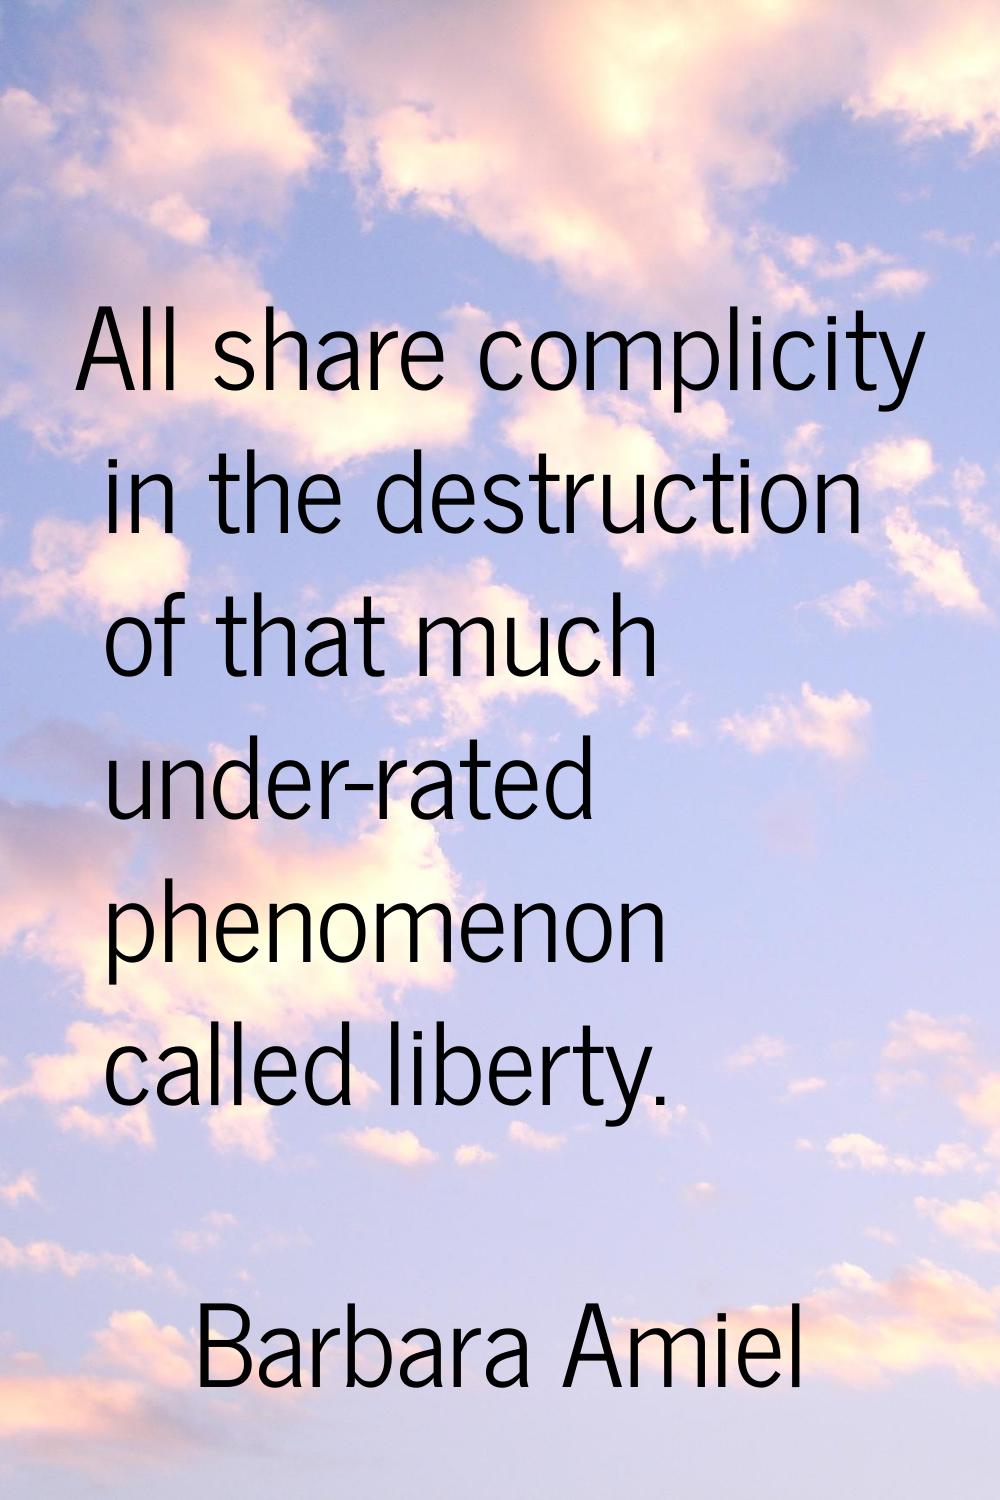 All share complicity in the destruction of that much under-rated phenomenon called liberty.